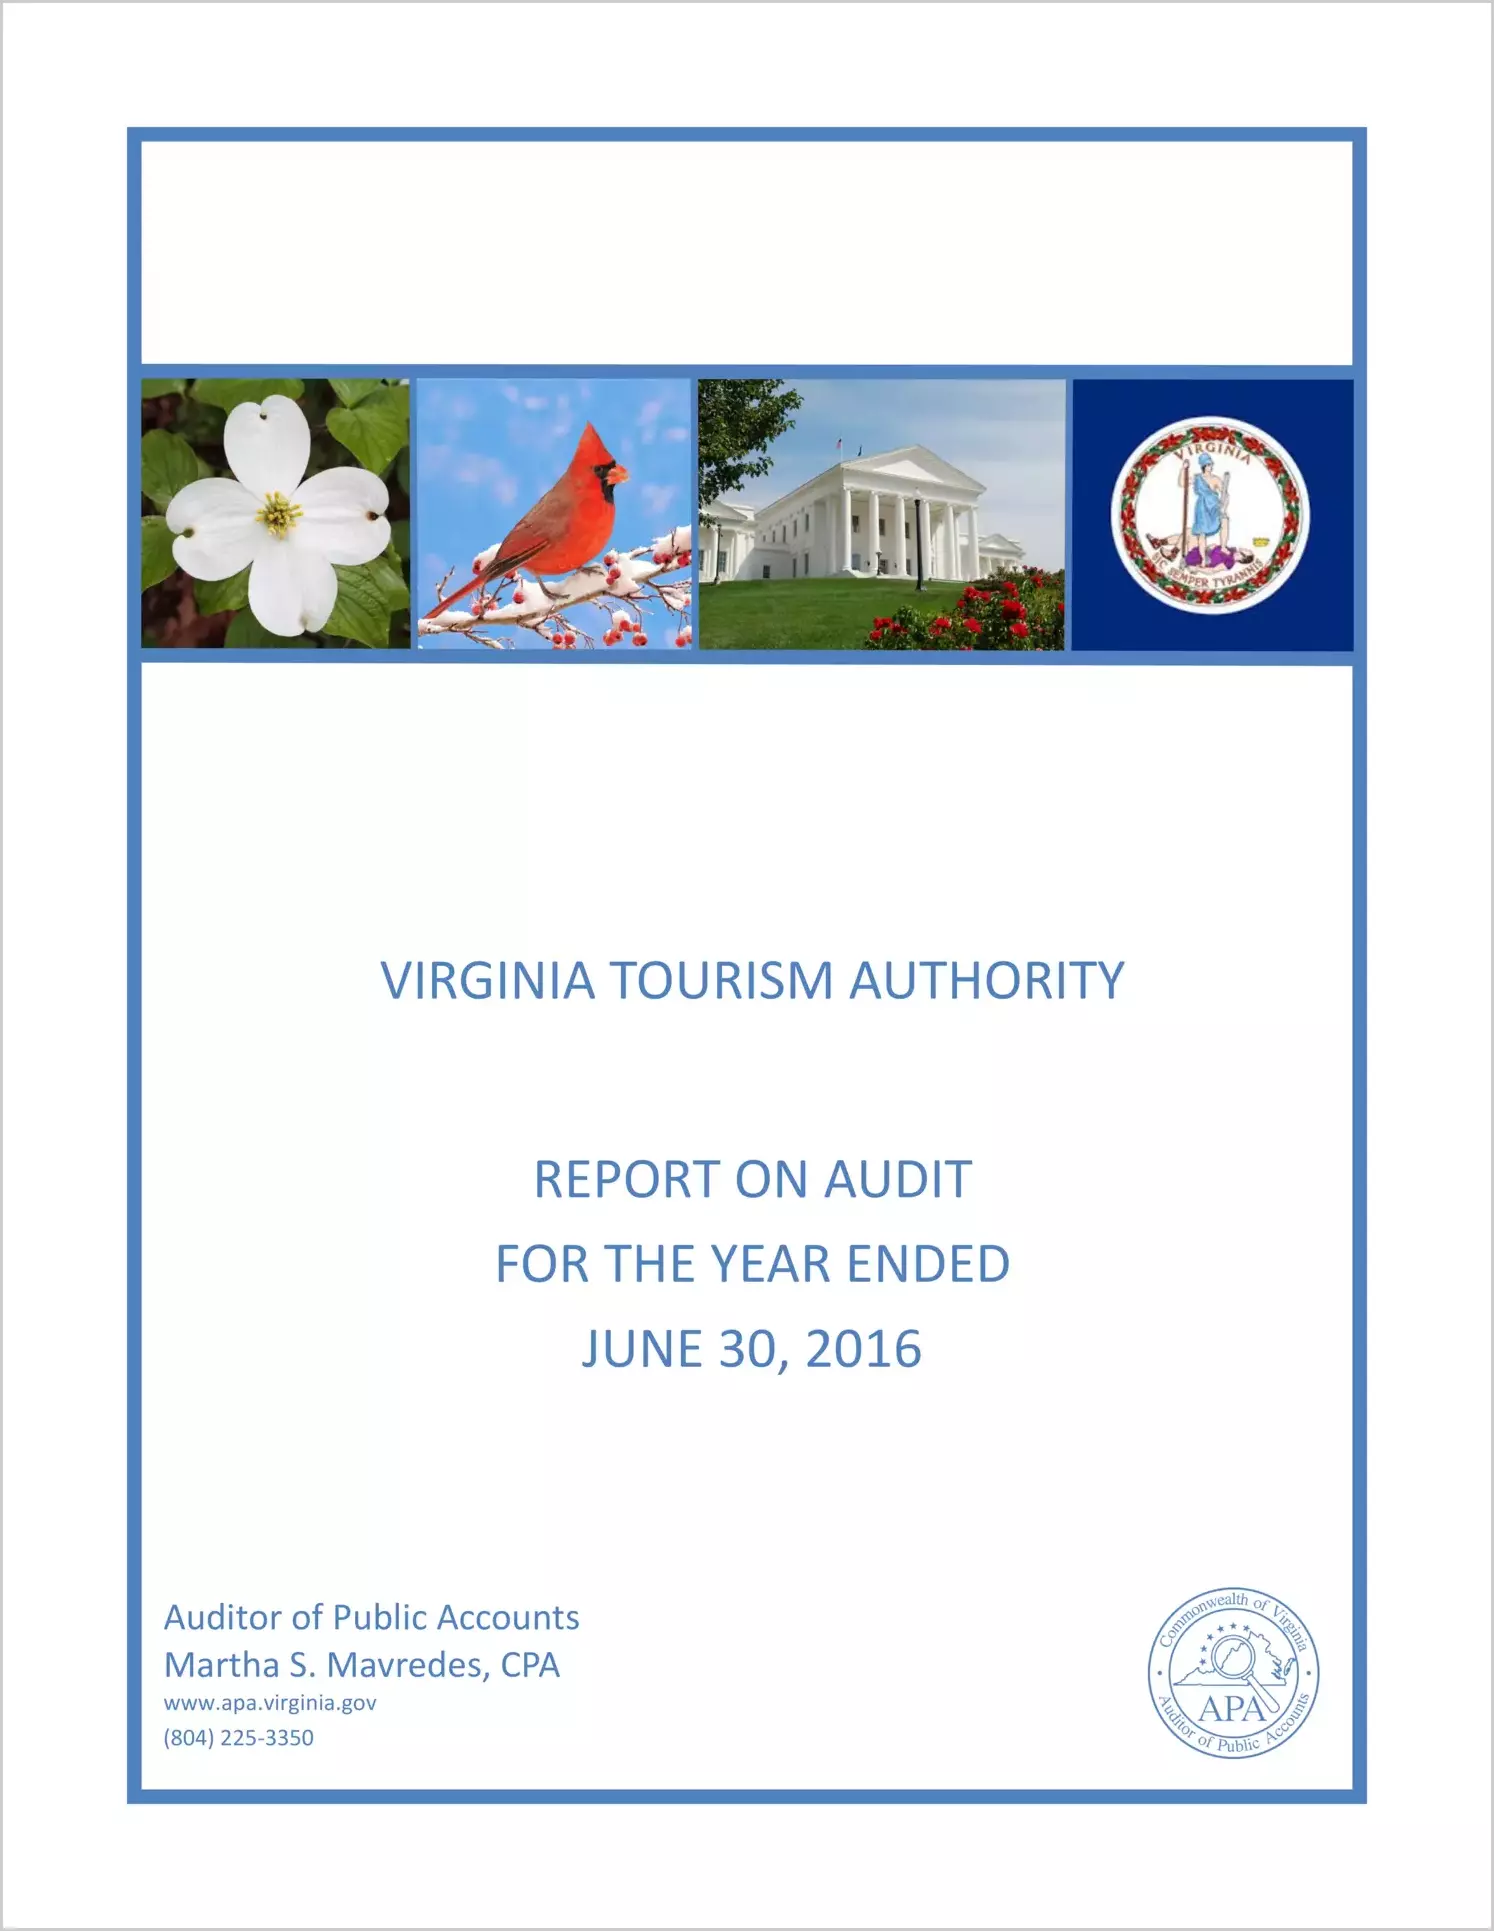 Virginia Tourism Authority for the year ended June 30, 2016